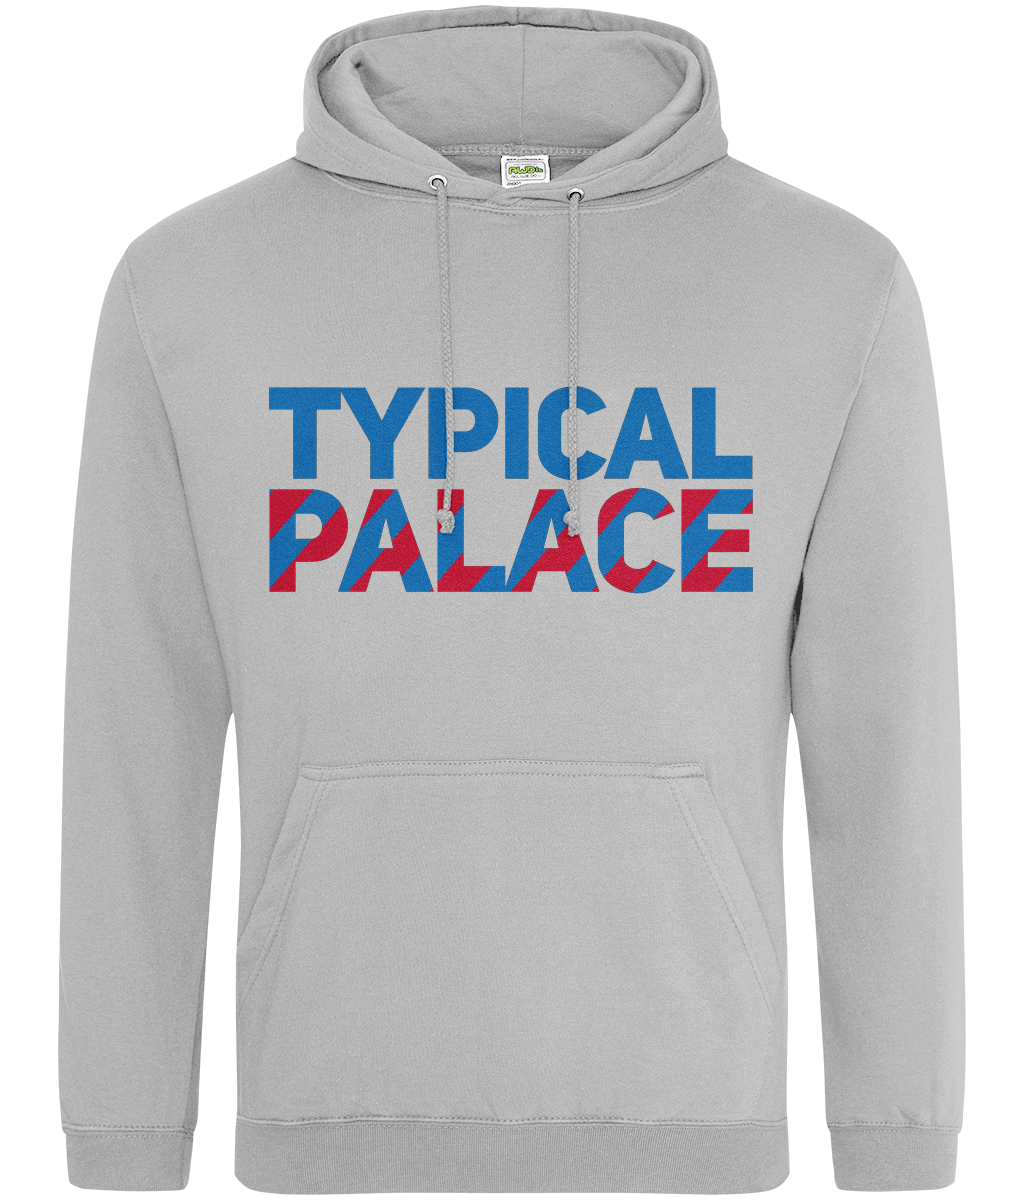 Typical Palace - Hoodie